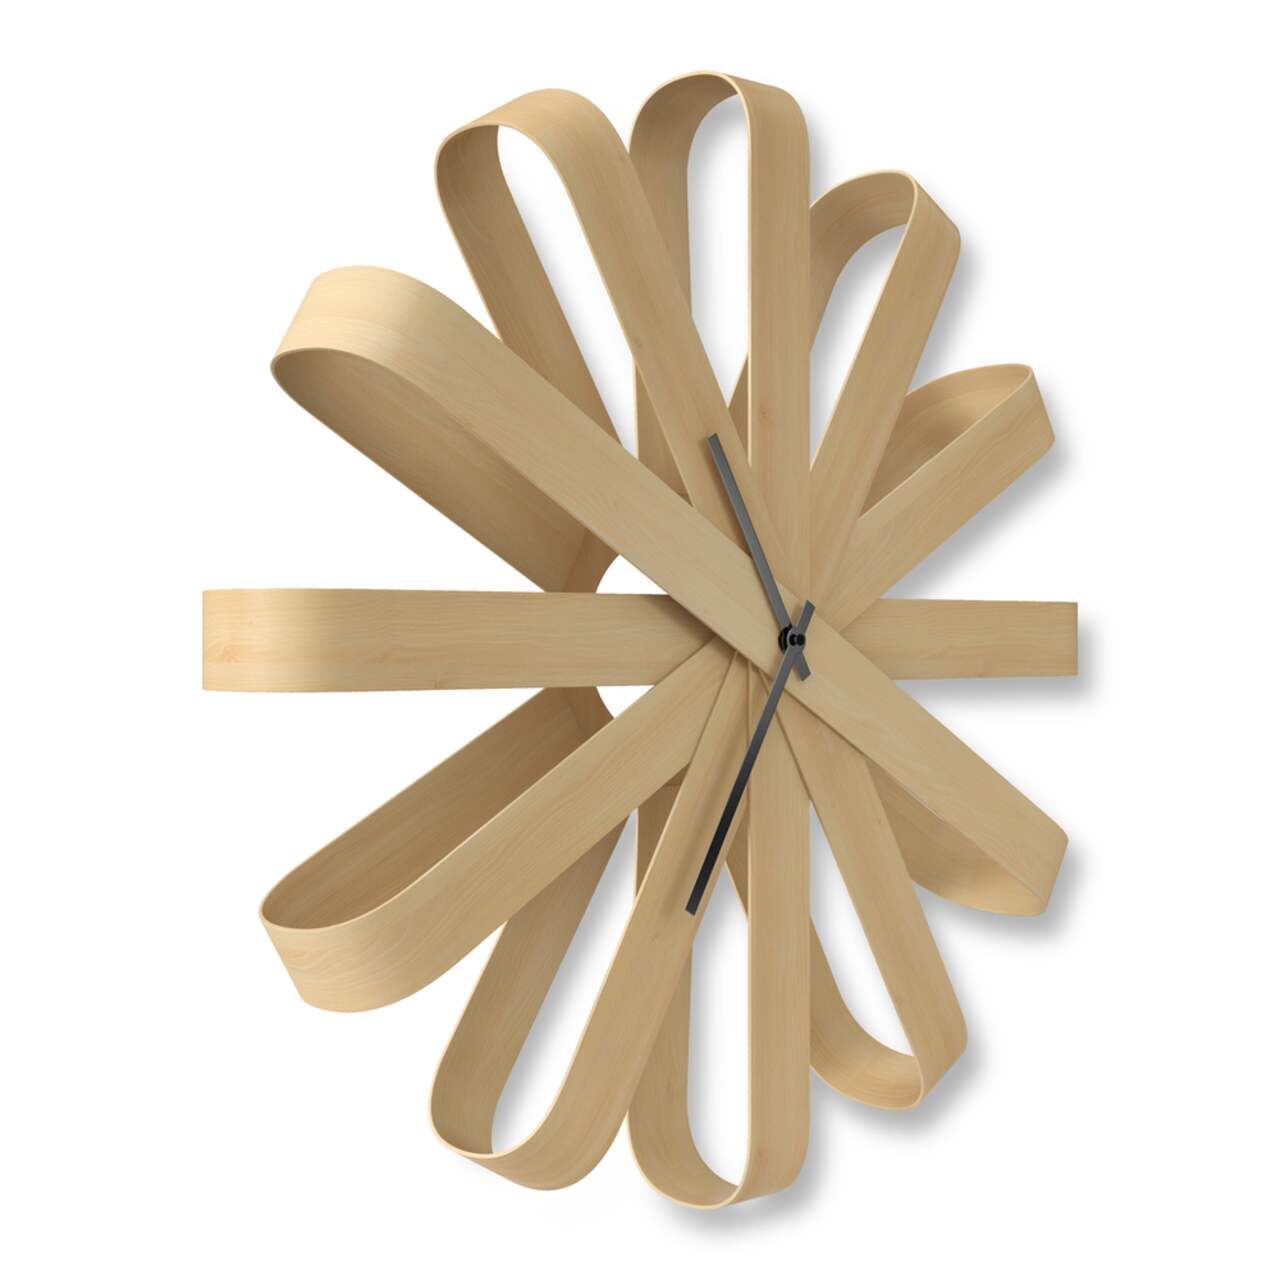 https://media-www.canadiantire.ca/product/living/home-decor/decor-accents/5741115/umbra-ribbonwood-wall-clock-natural-20-25in-cd687812-c2db-479e-8d6c-2606e6ae16fd.png?imdensity=1&imwidth=640&impolicy=mZoom